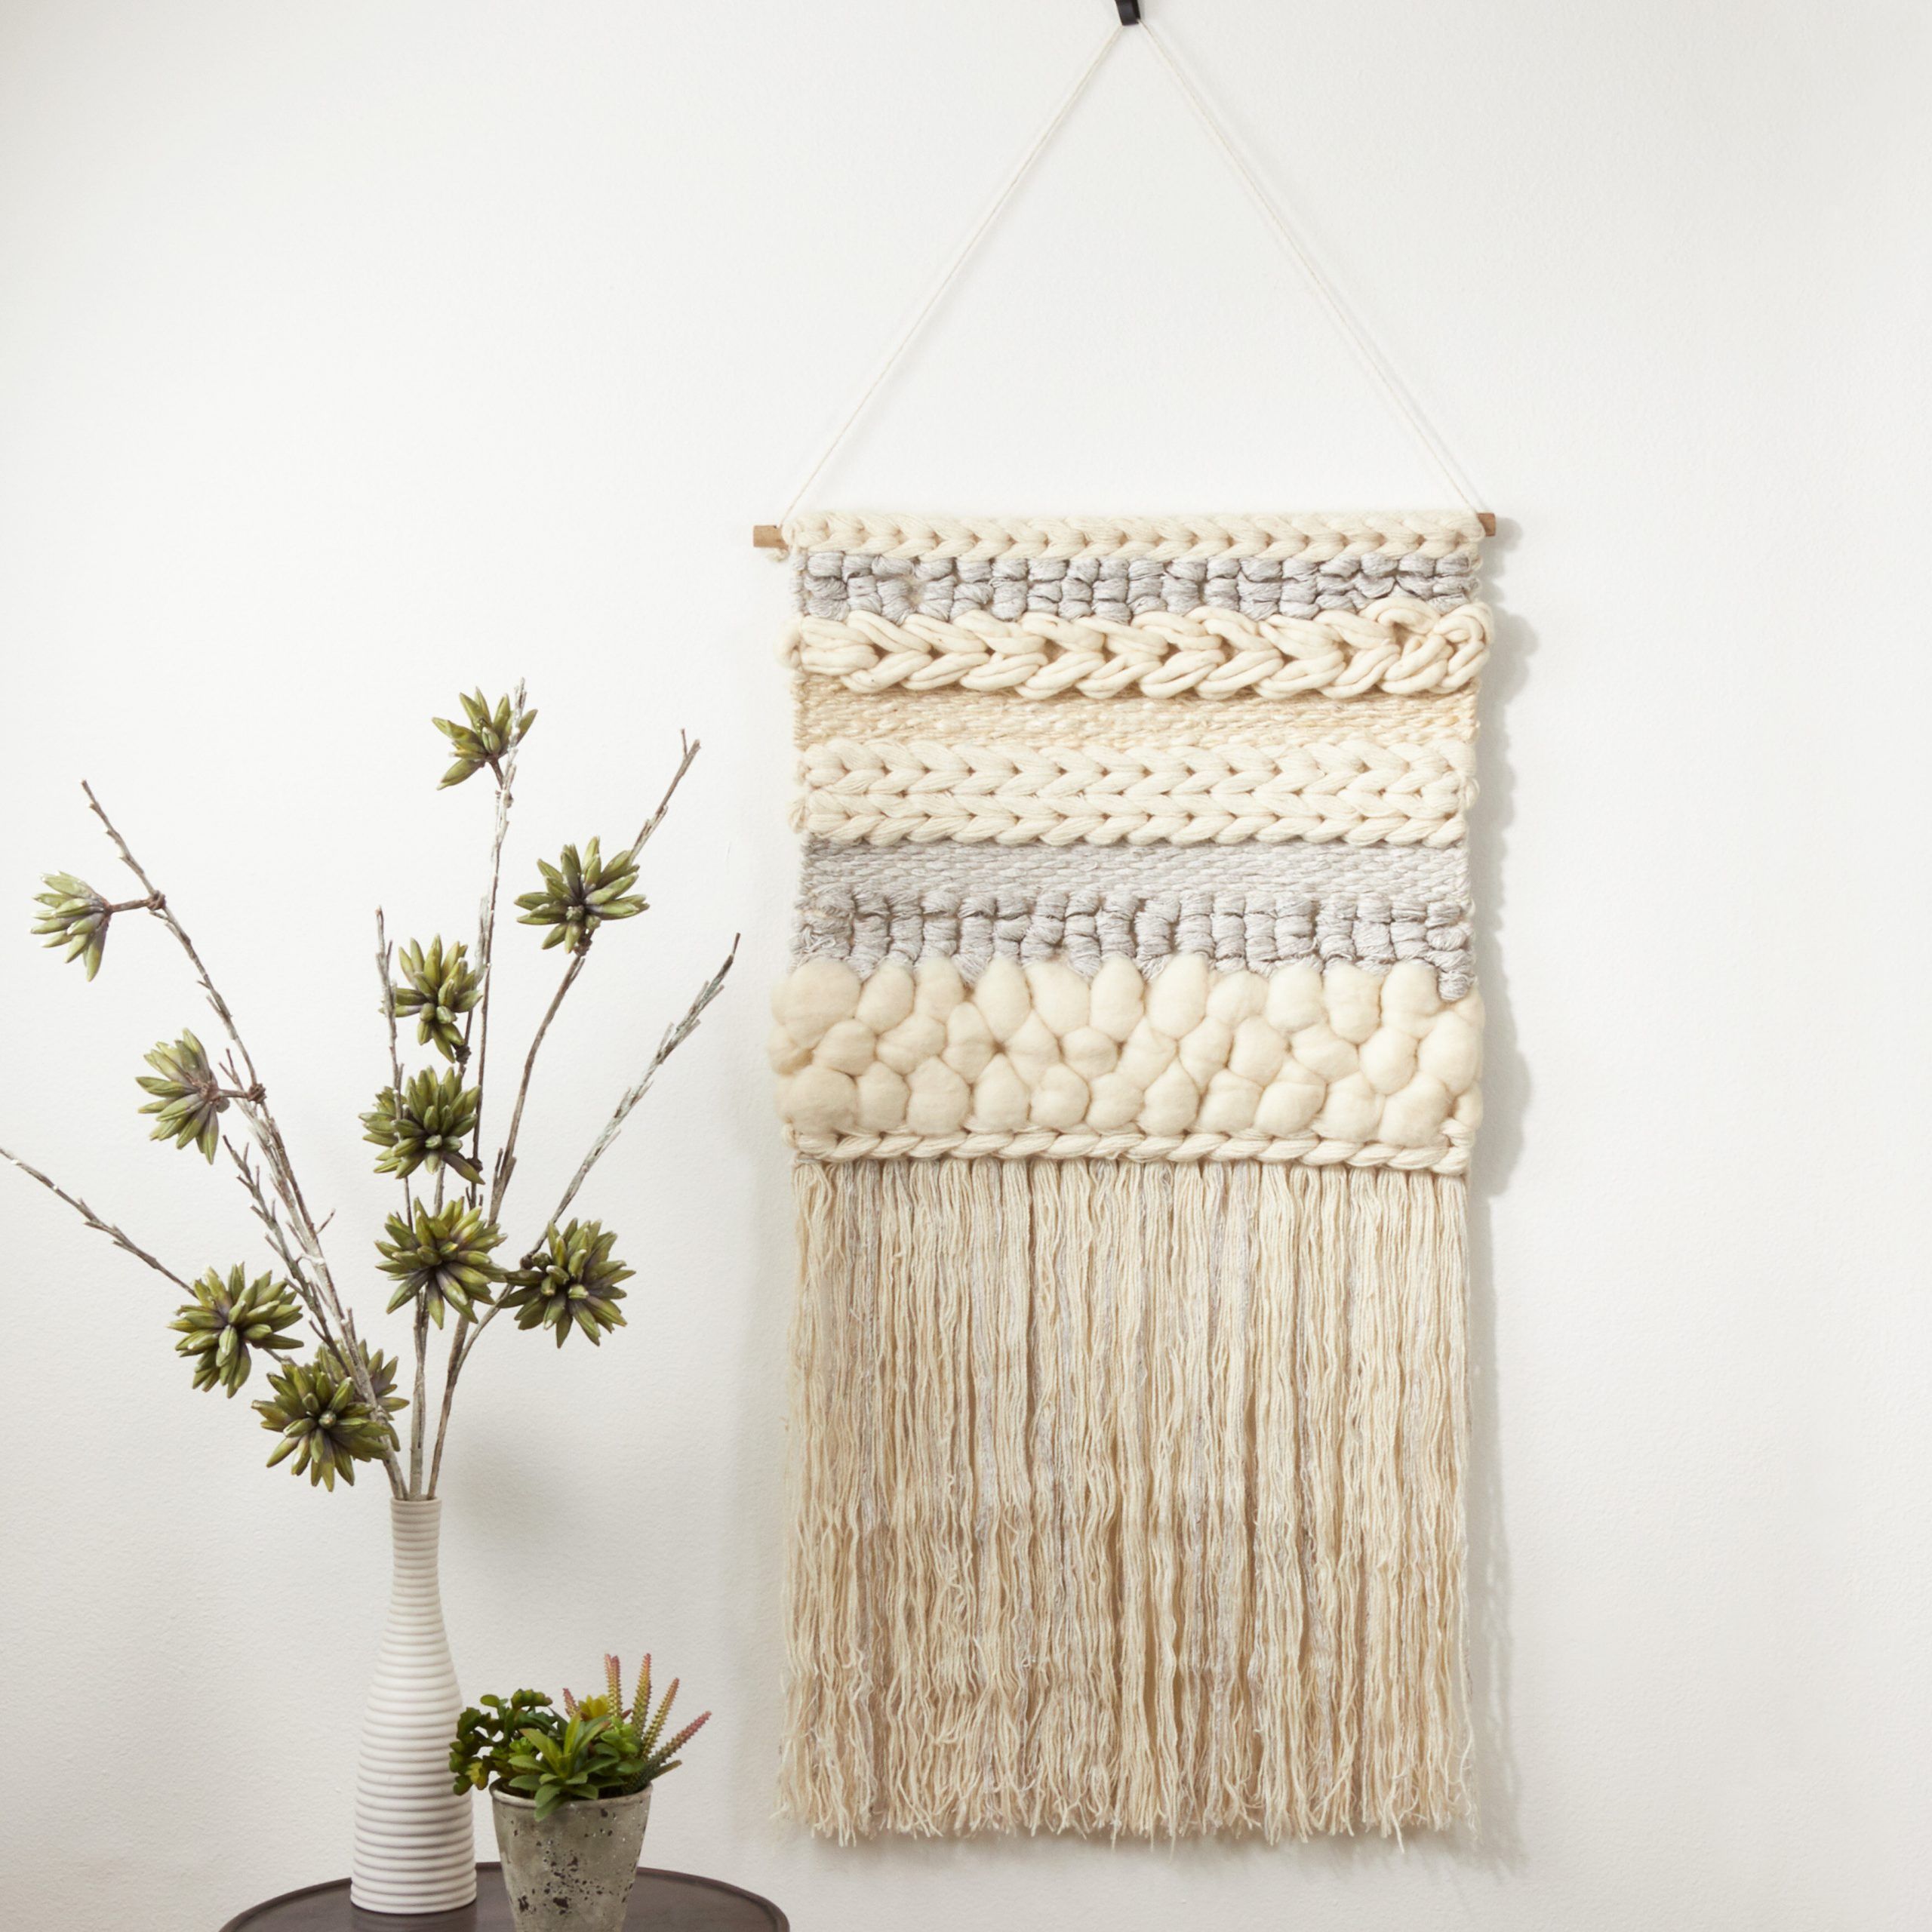 Blended Fabric Fringed Braided Design With Rod Included With Recent Blended Fabric Klimt Tree Of Life Wall Hangings (View 18 of 20)